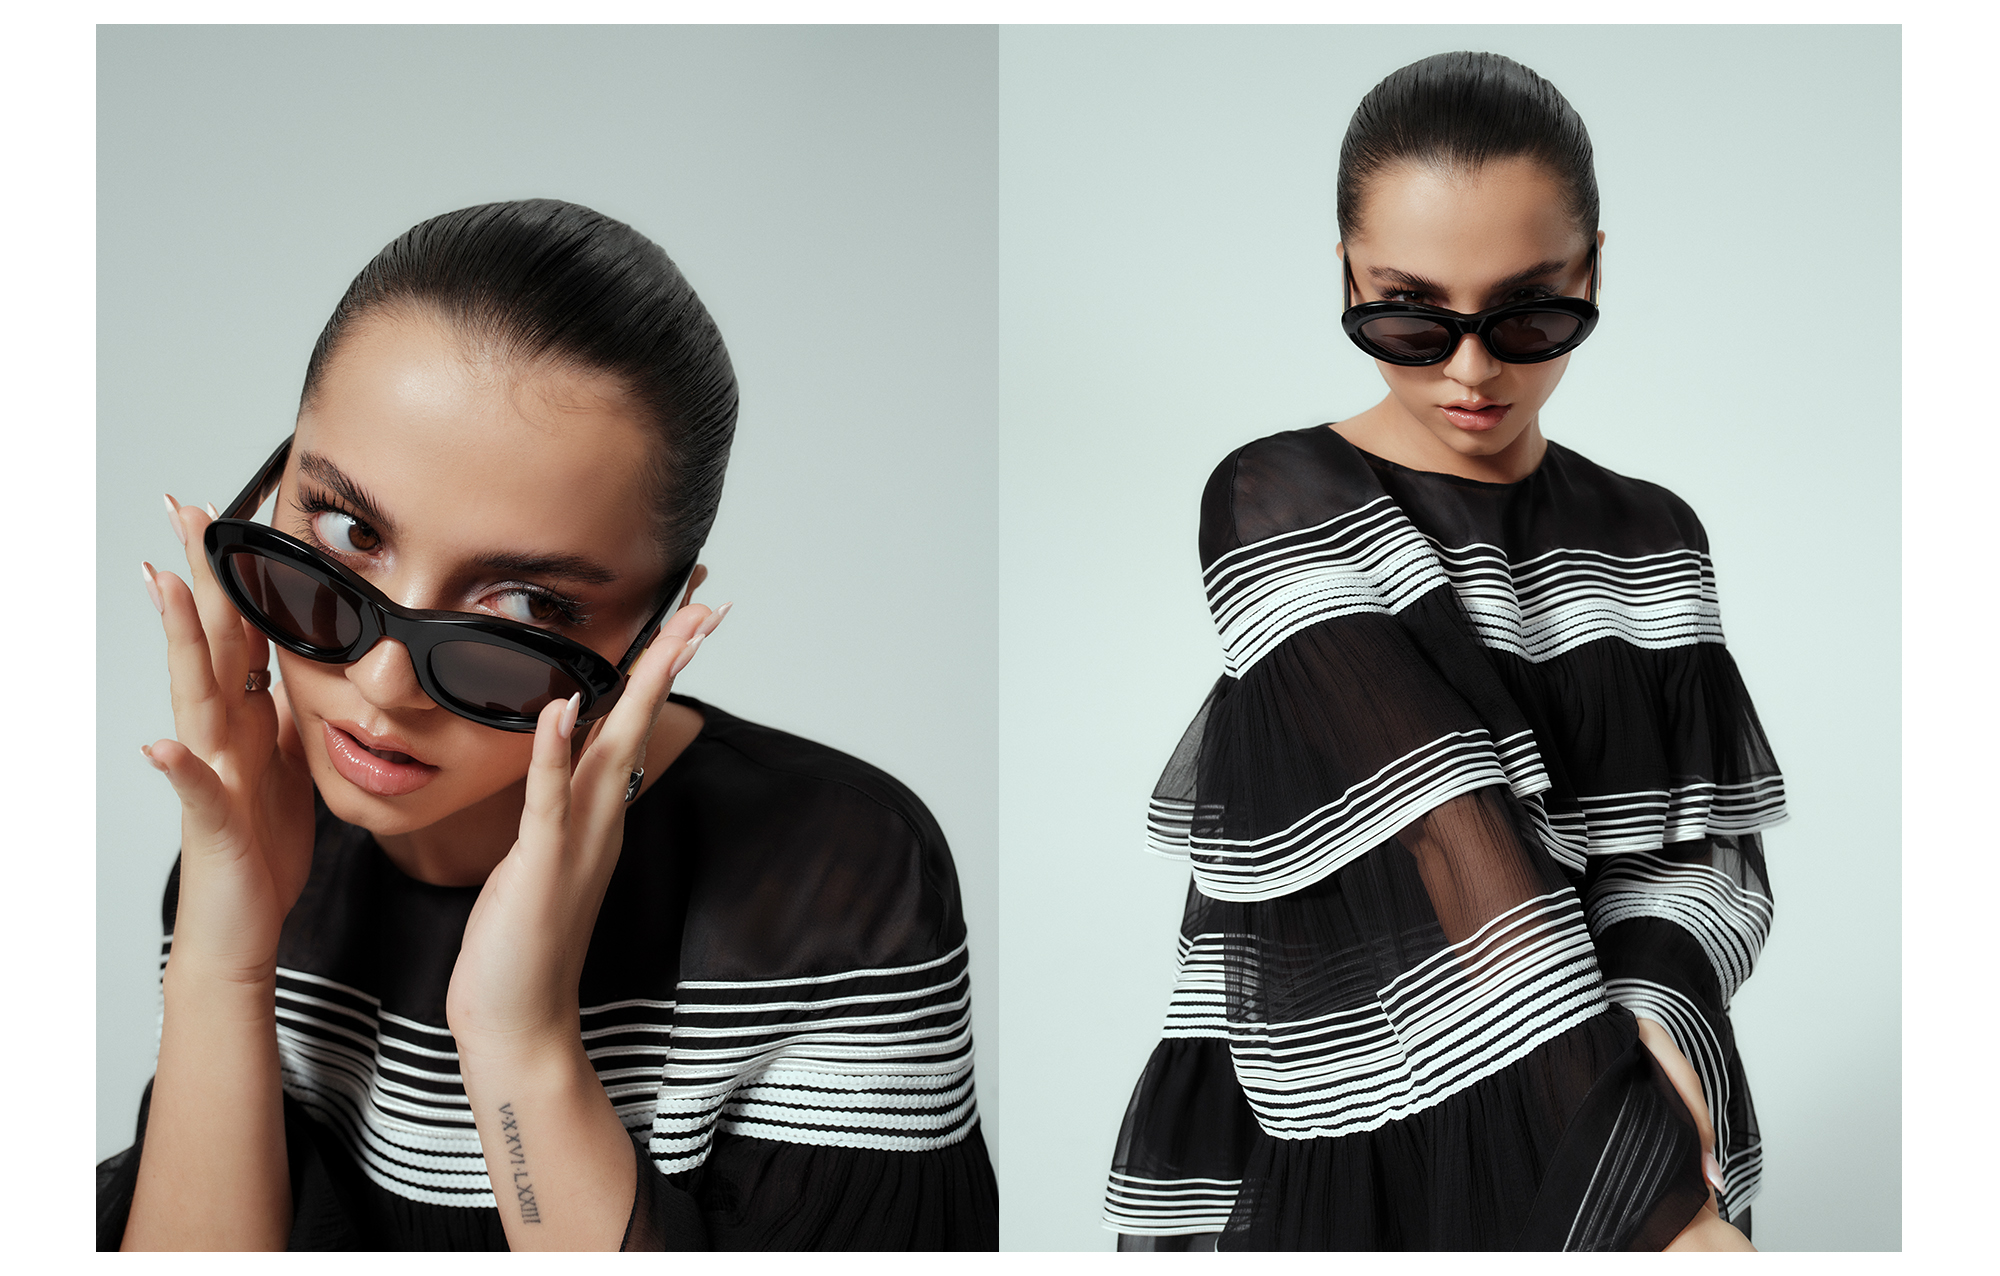 Isabela Merced poses wearing black sunglasses and Chanel black and white stripe dress.